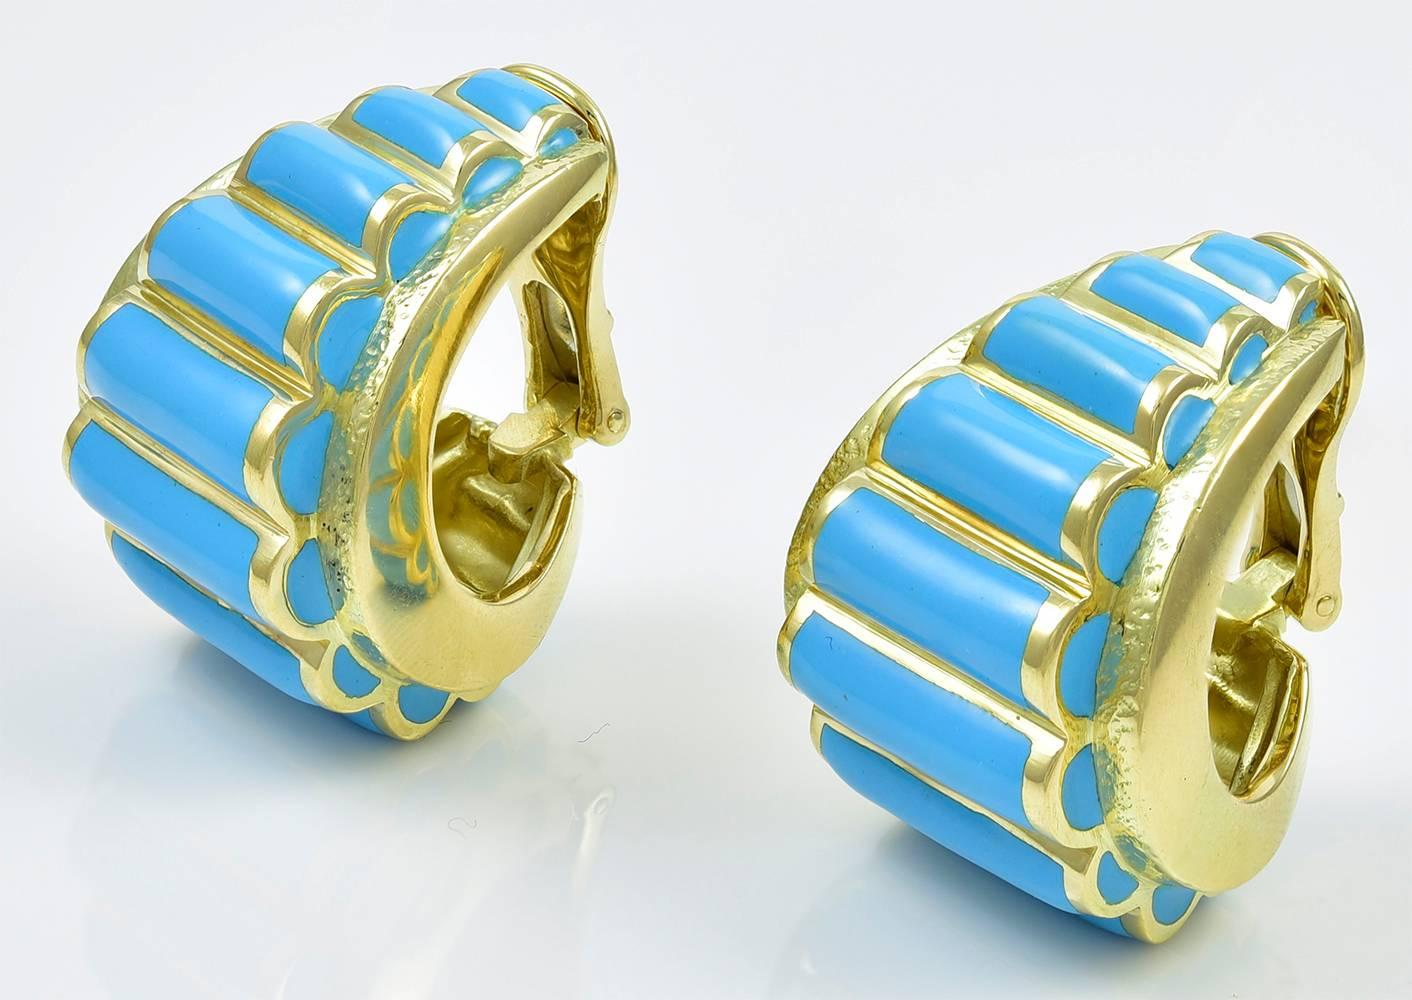 Gorgeous large ear clips.  Made and signed by DAVID WEBB.  18K yellow gold with turquoise enamel.  An attractive contrast between shiny and satin gold.   Omega clips.  1 1/4